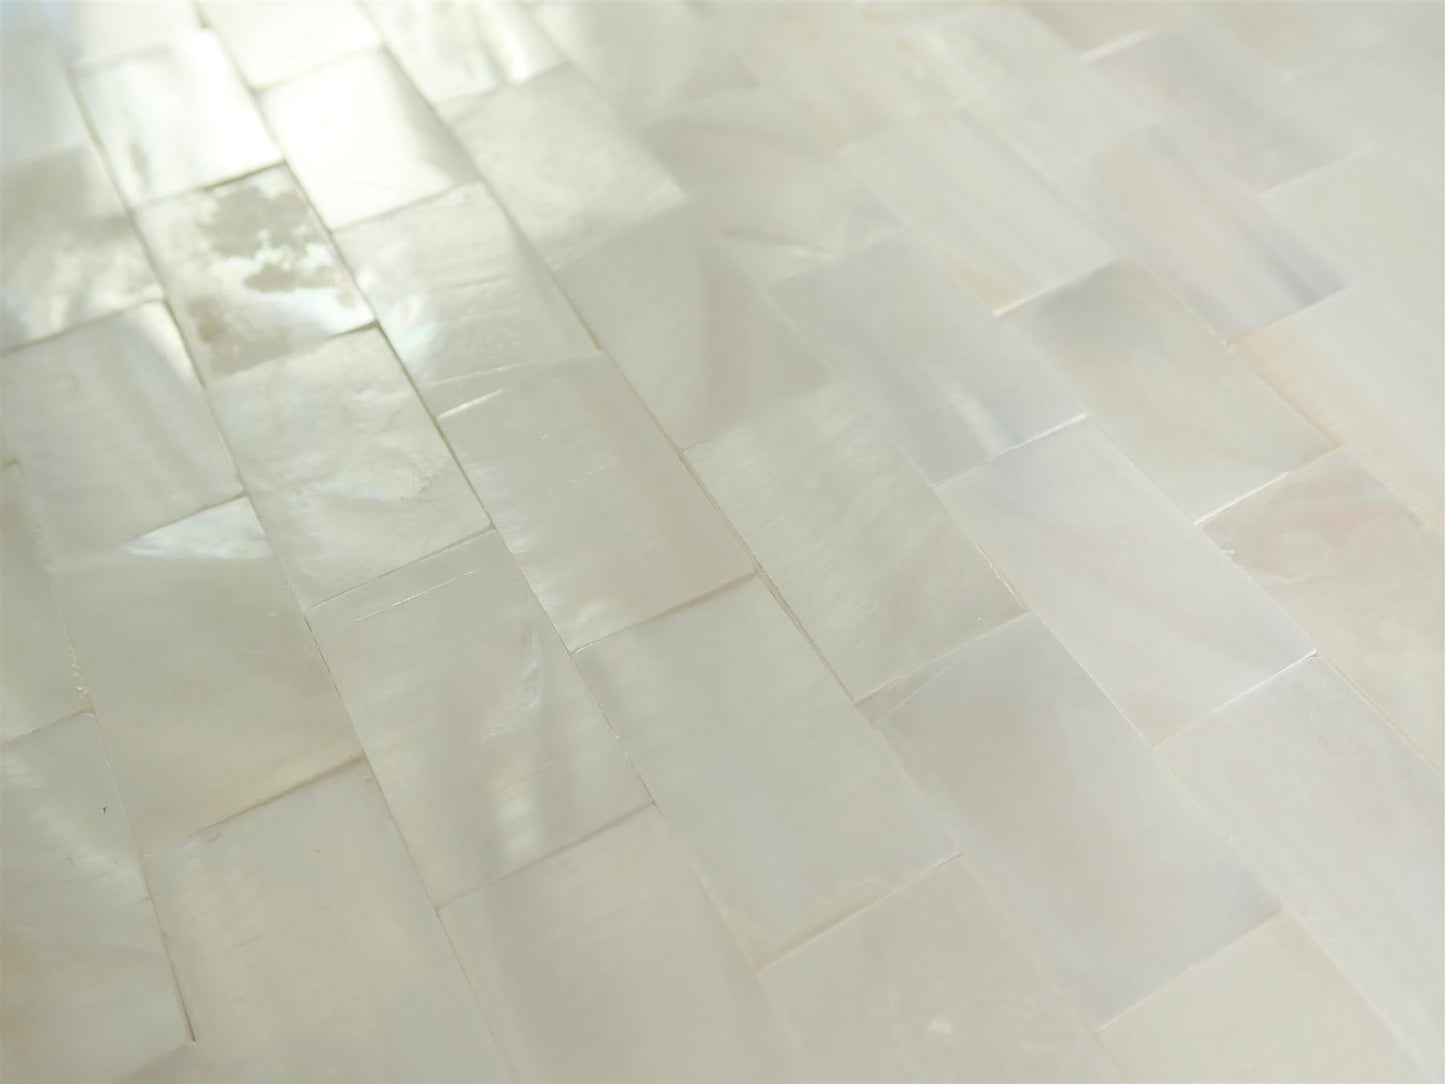 Incudo White Gapless Metro Mosaic Mother of Pearl Tile - 288x300x2mm (11.3x11.81x0.08")